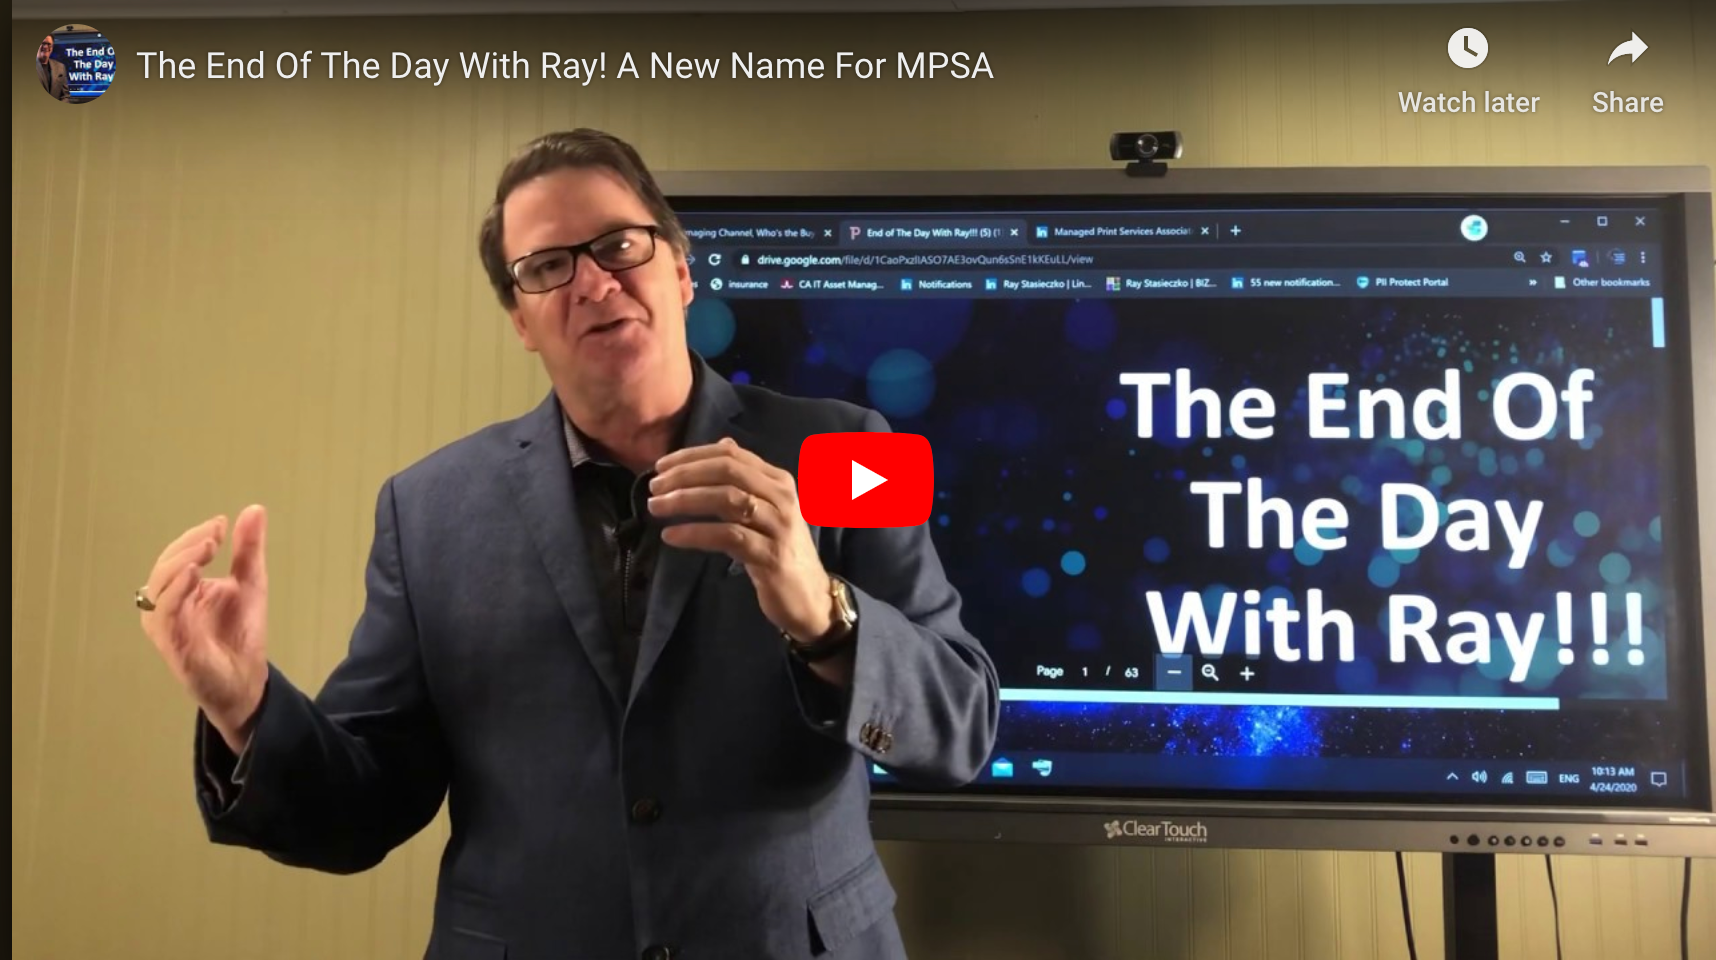 The End Of The Day With Ray! A New Name For MPSA